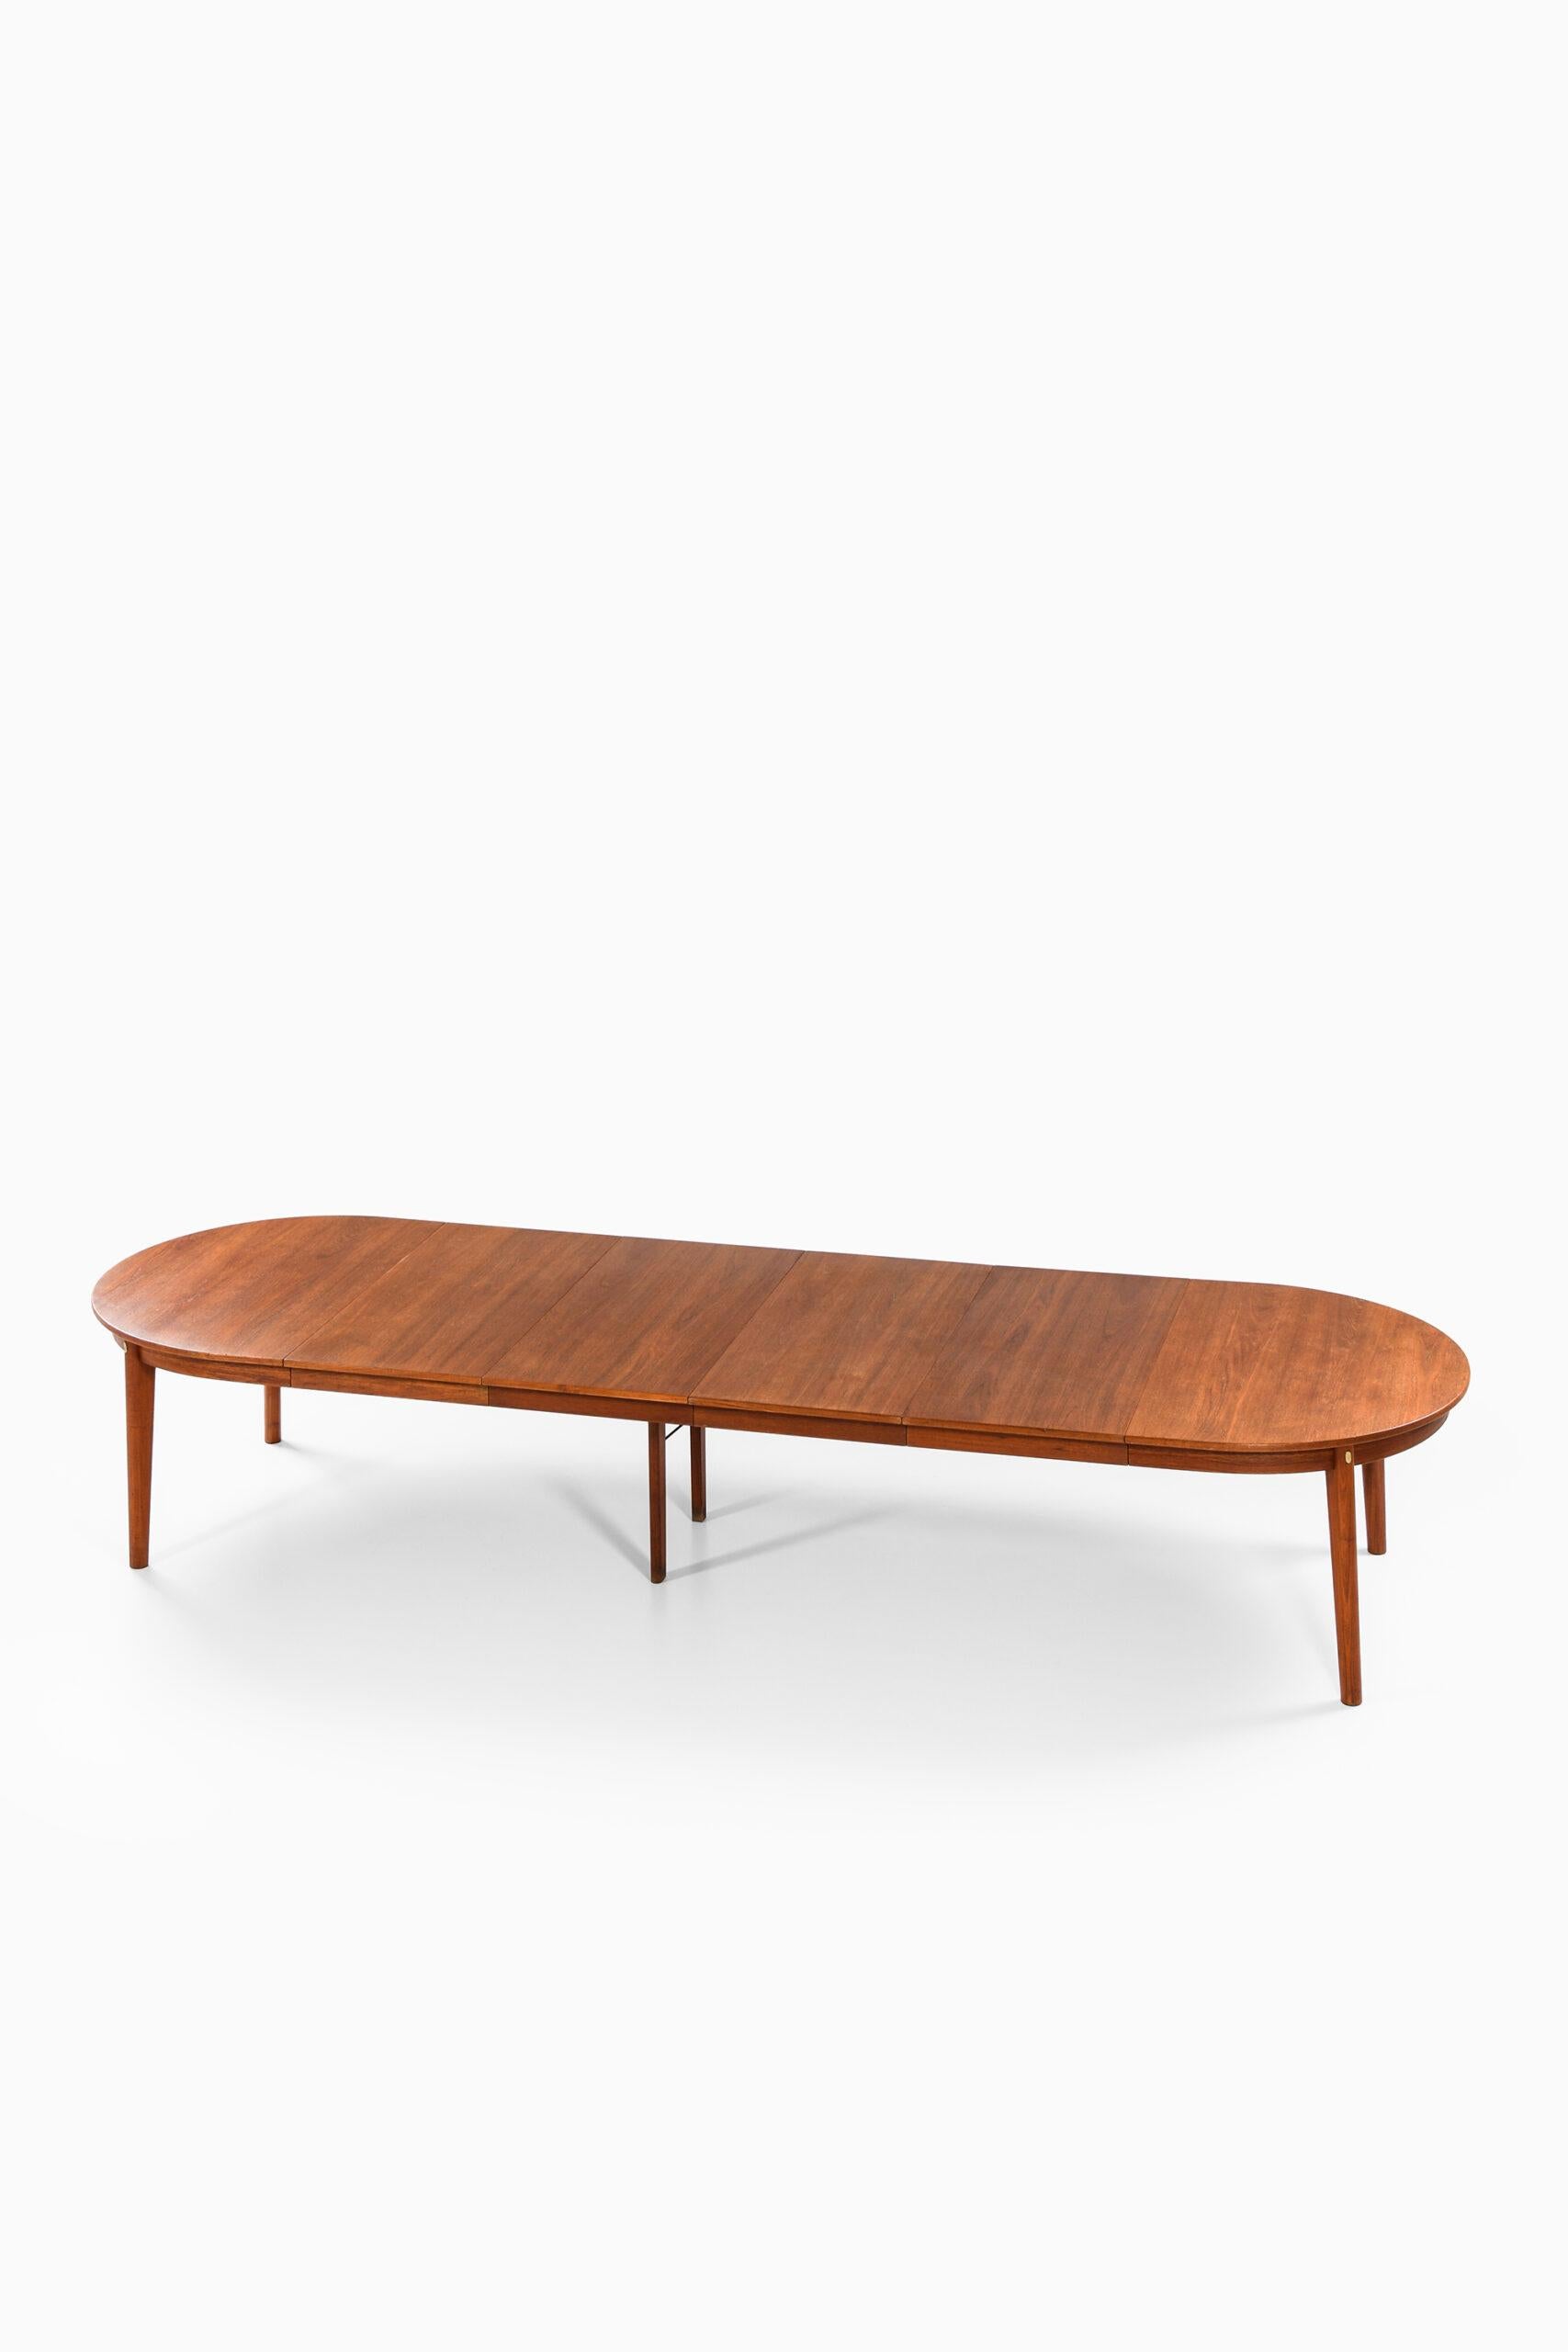 Very rare dining table model Öresund designed by Børge Mogensen. Produced by Karl Andersson & Söner in Sweden. Retailed at Illums Bolighus.
Dimensions (W x D x H): 170 ( 410 ) x 130 x 72 cm.